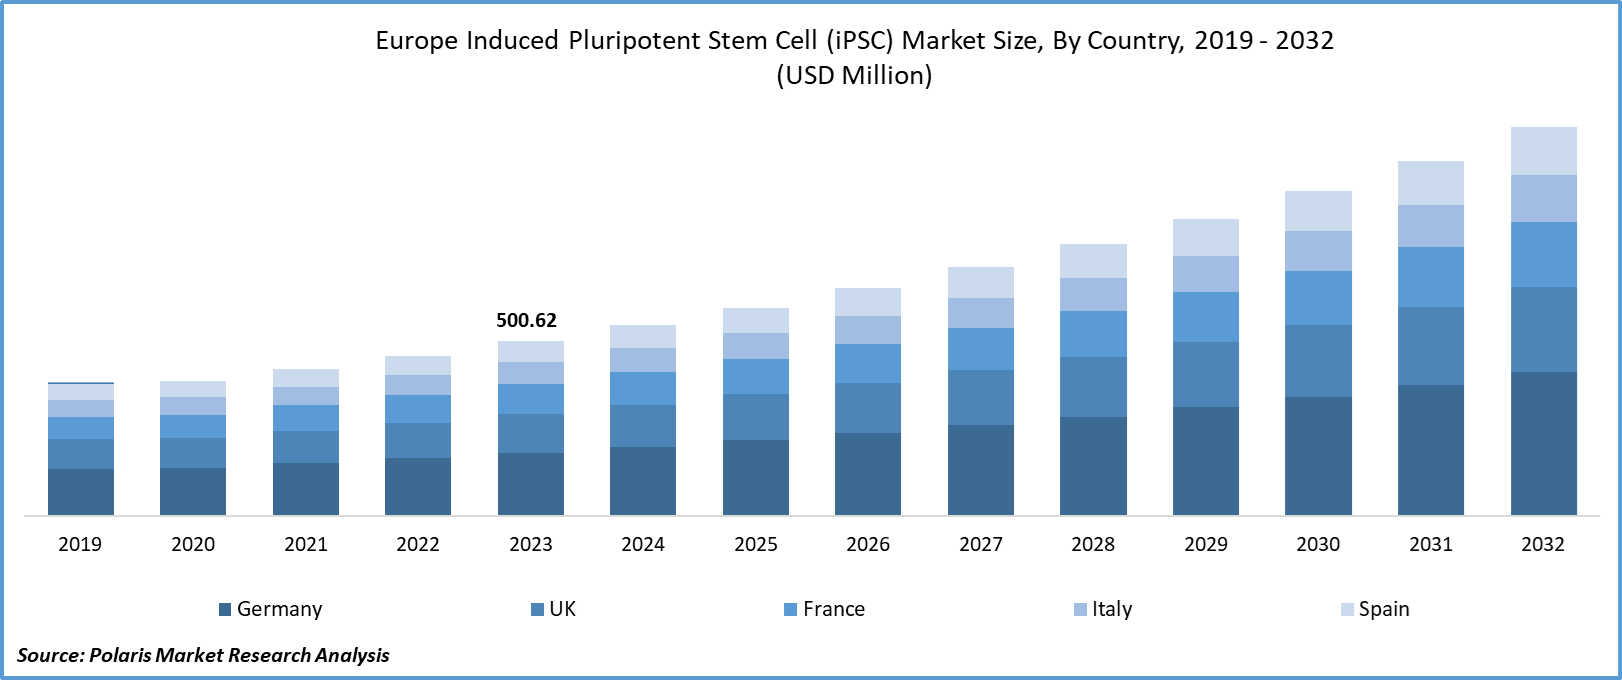 Europe Induced Pluripotent Stem Cell (iPSC) Market Size